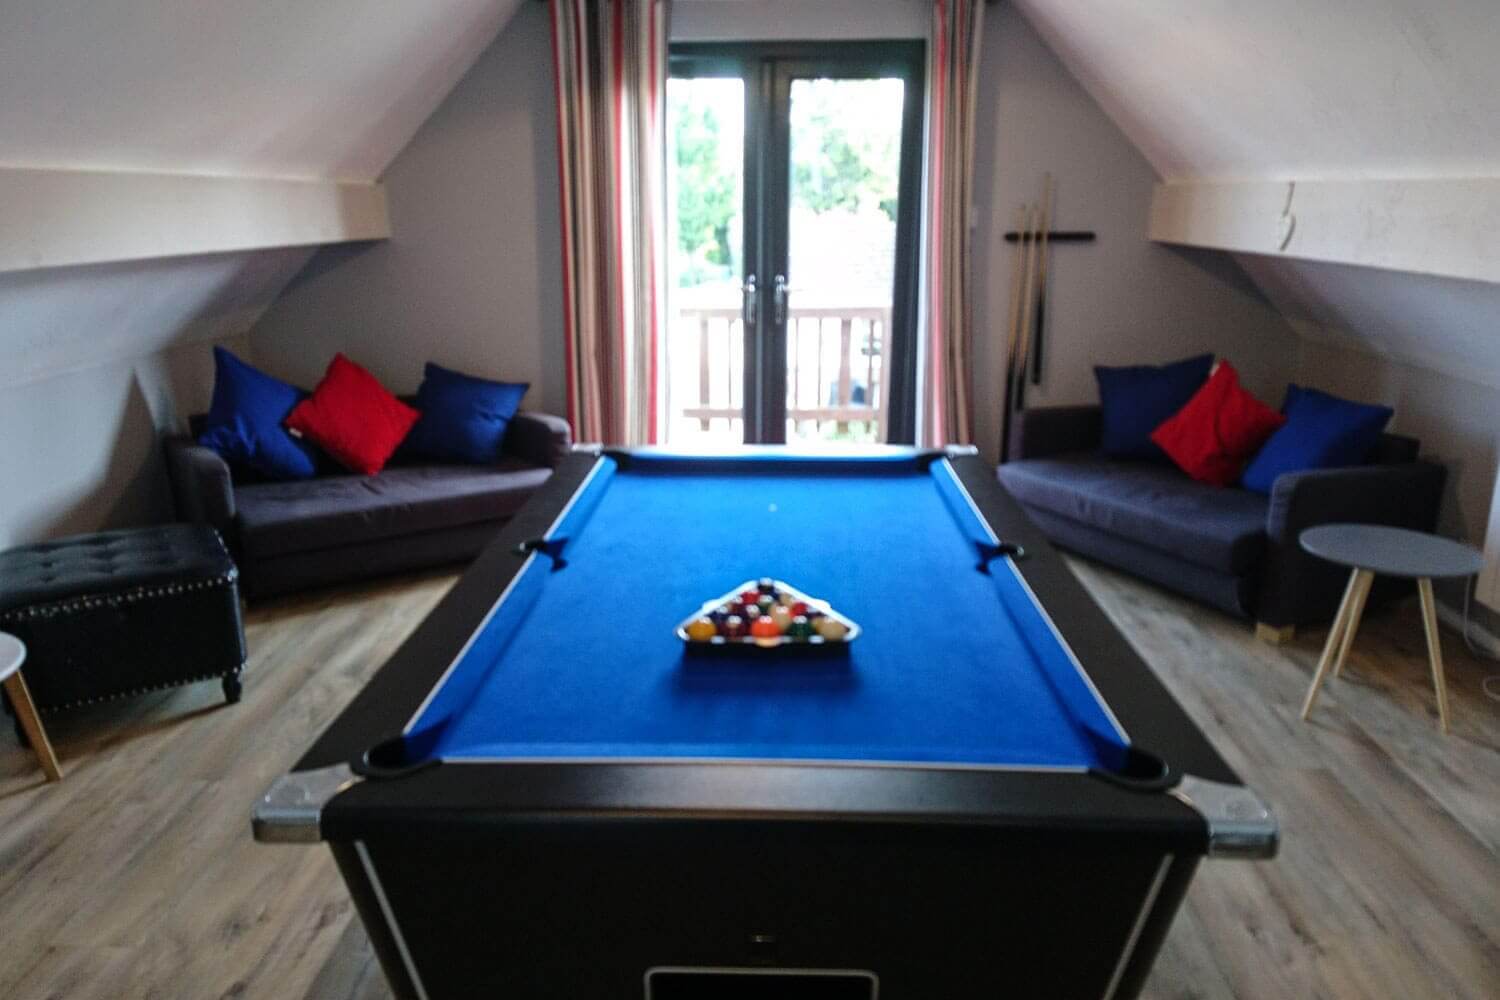 Venues with games rooms